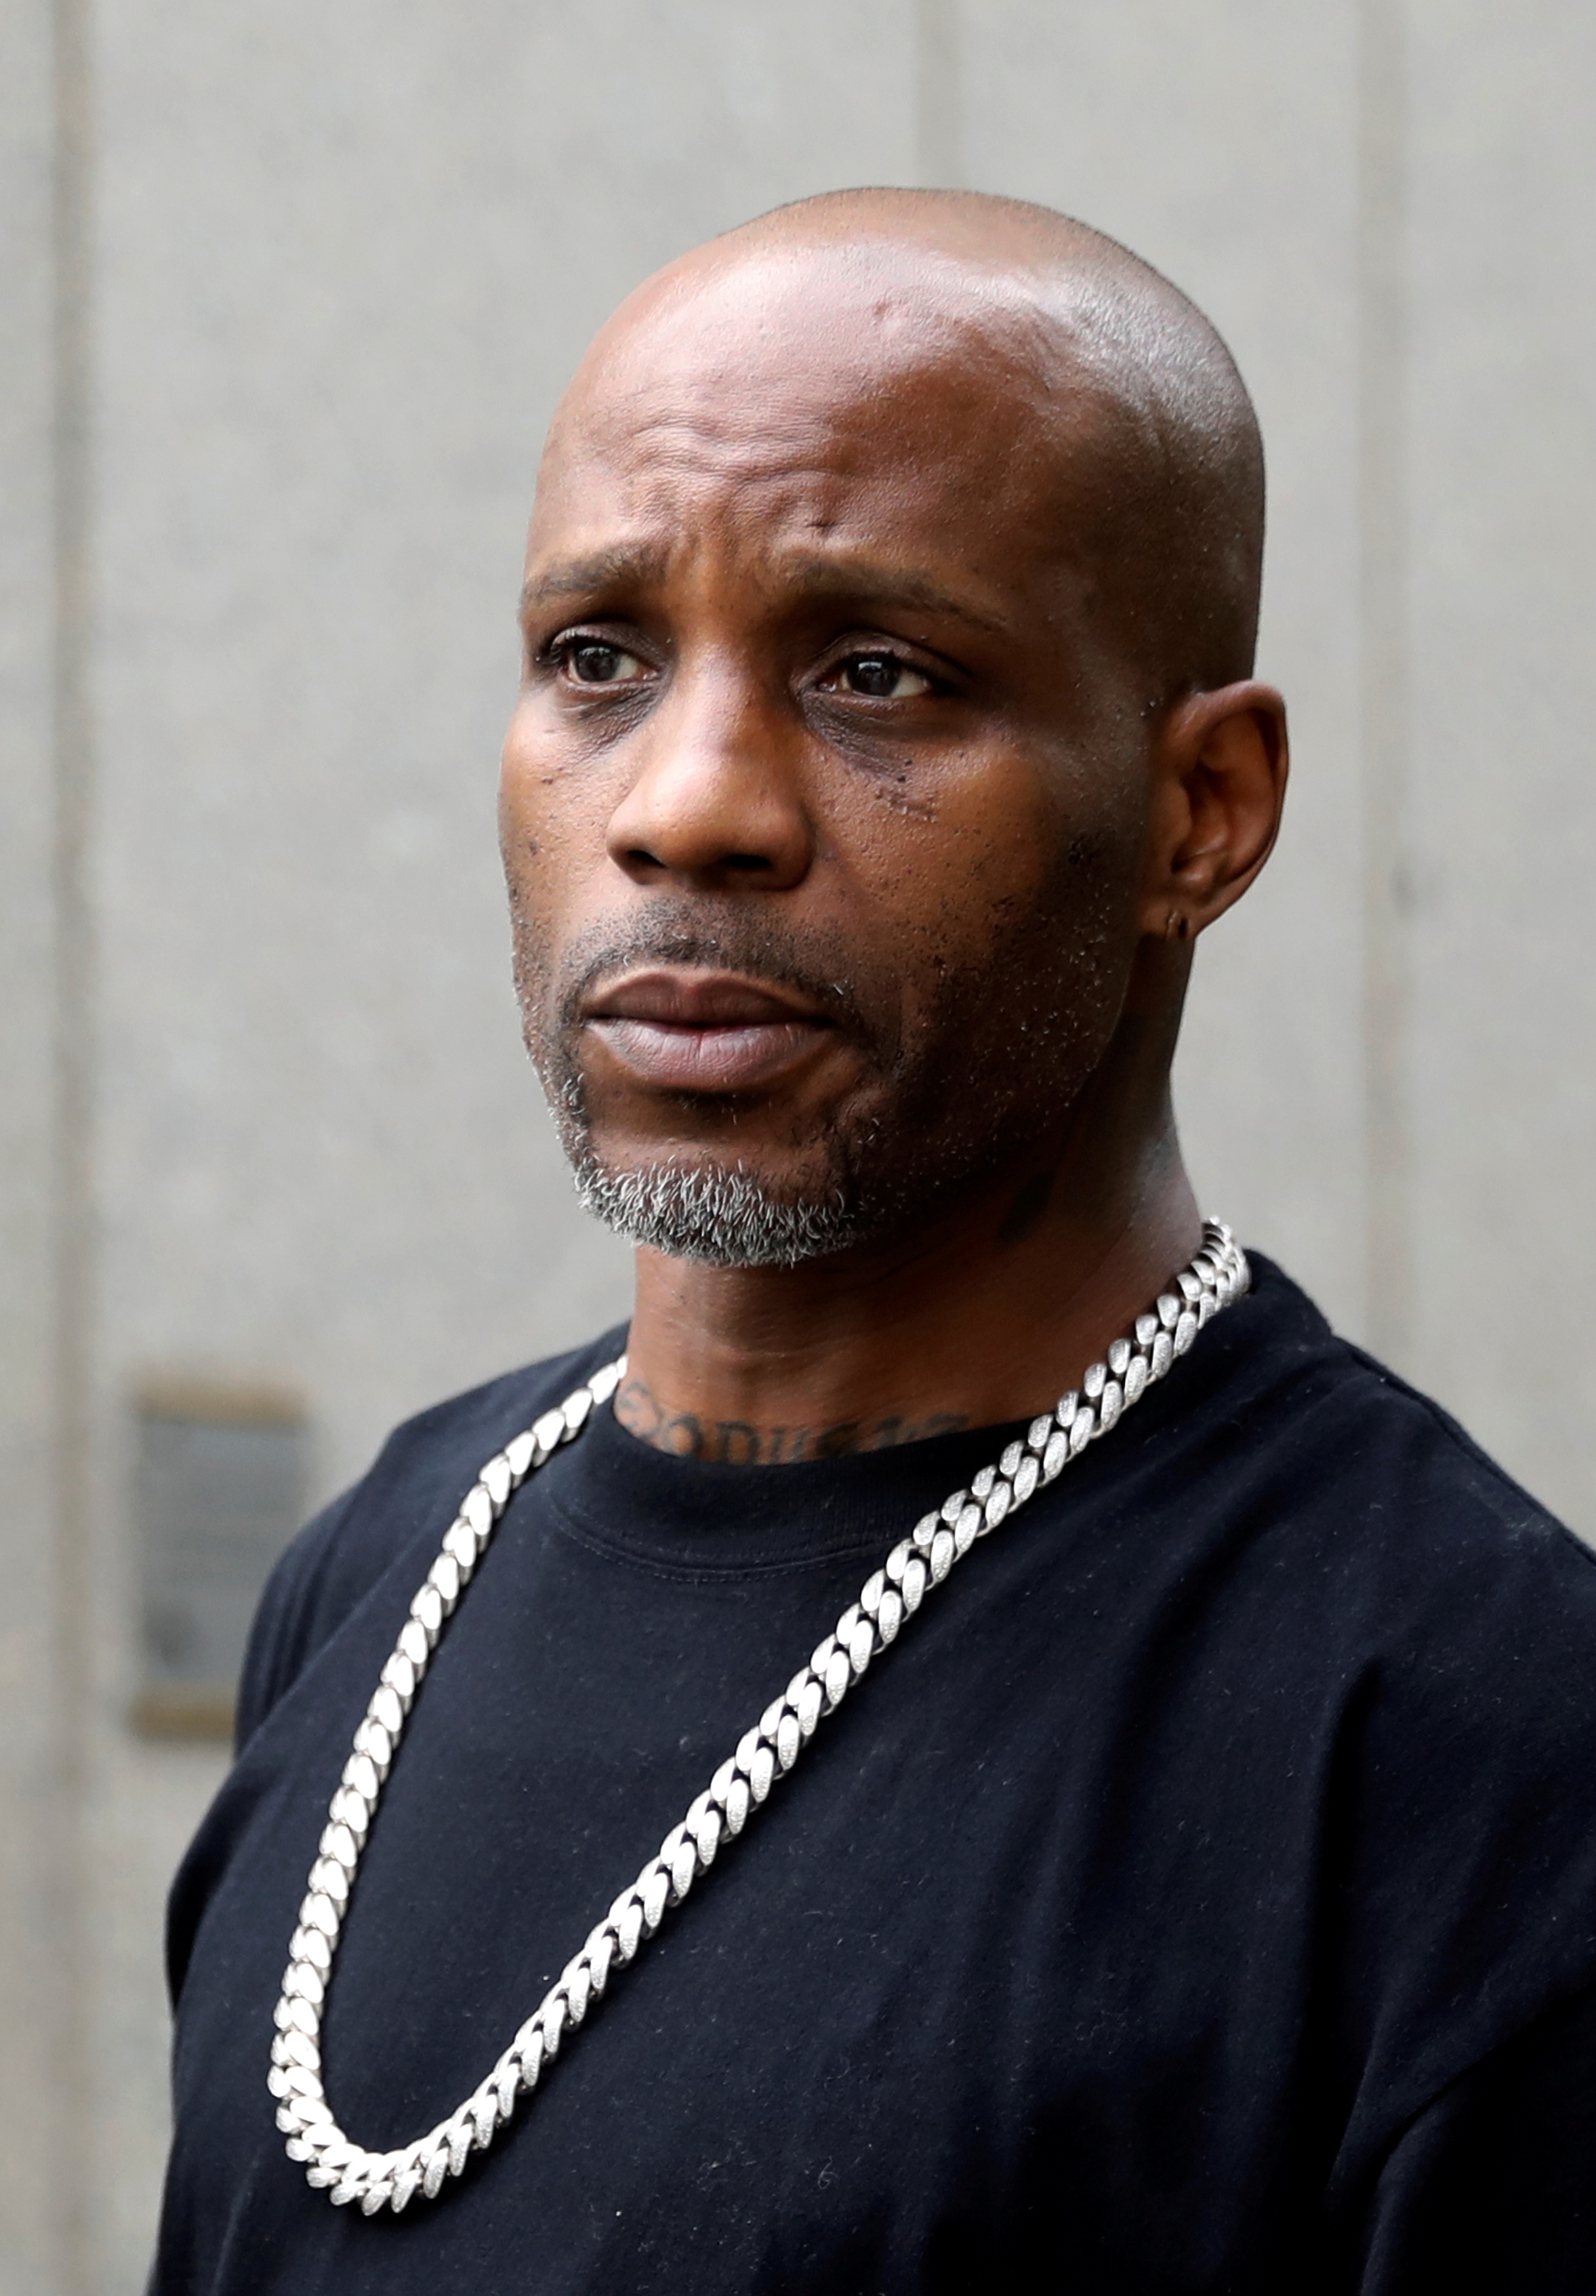 Rapper DMX has died at age 50 - People magazine